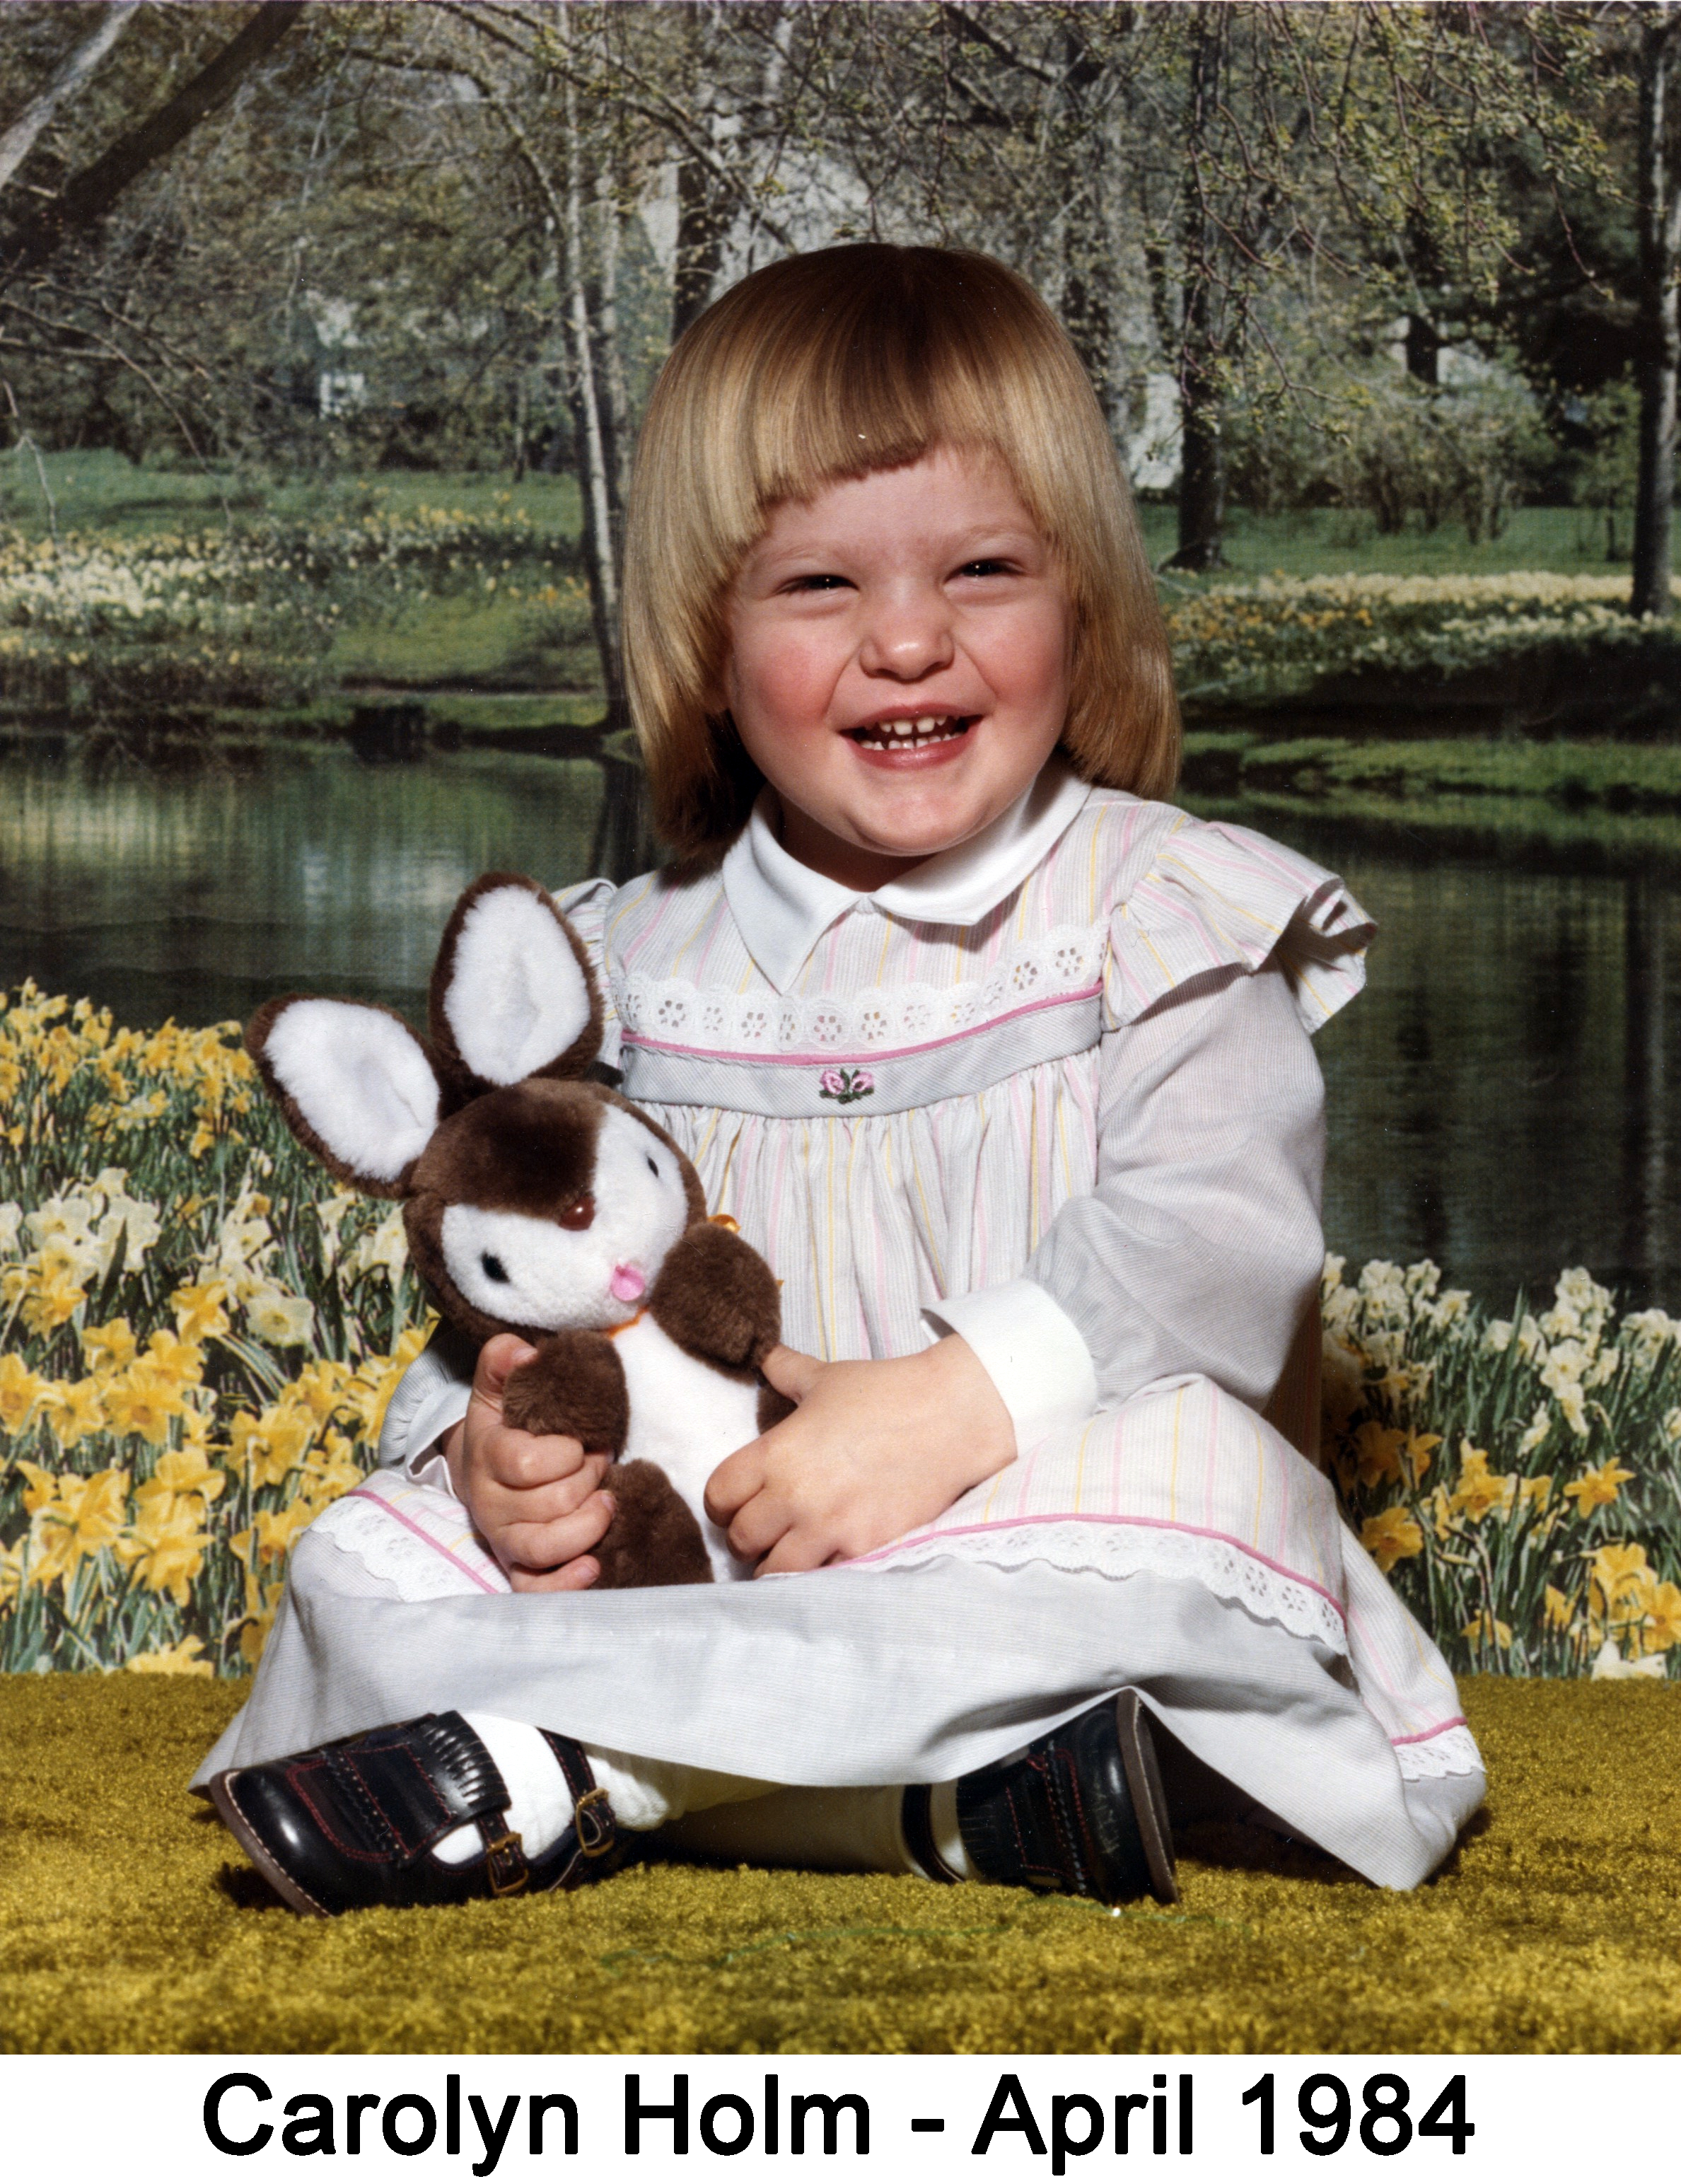 Carolyn Holm with a stuffed bunny is sitting in front of a phtograph of a stream and woods